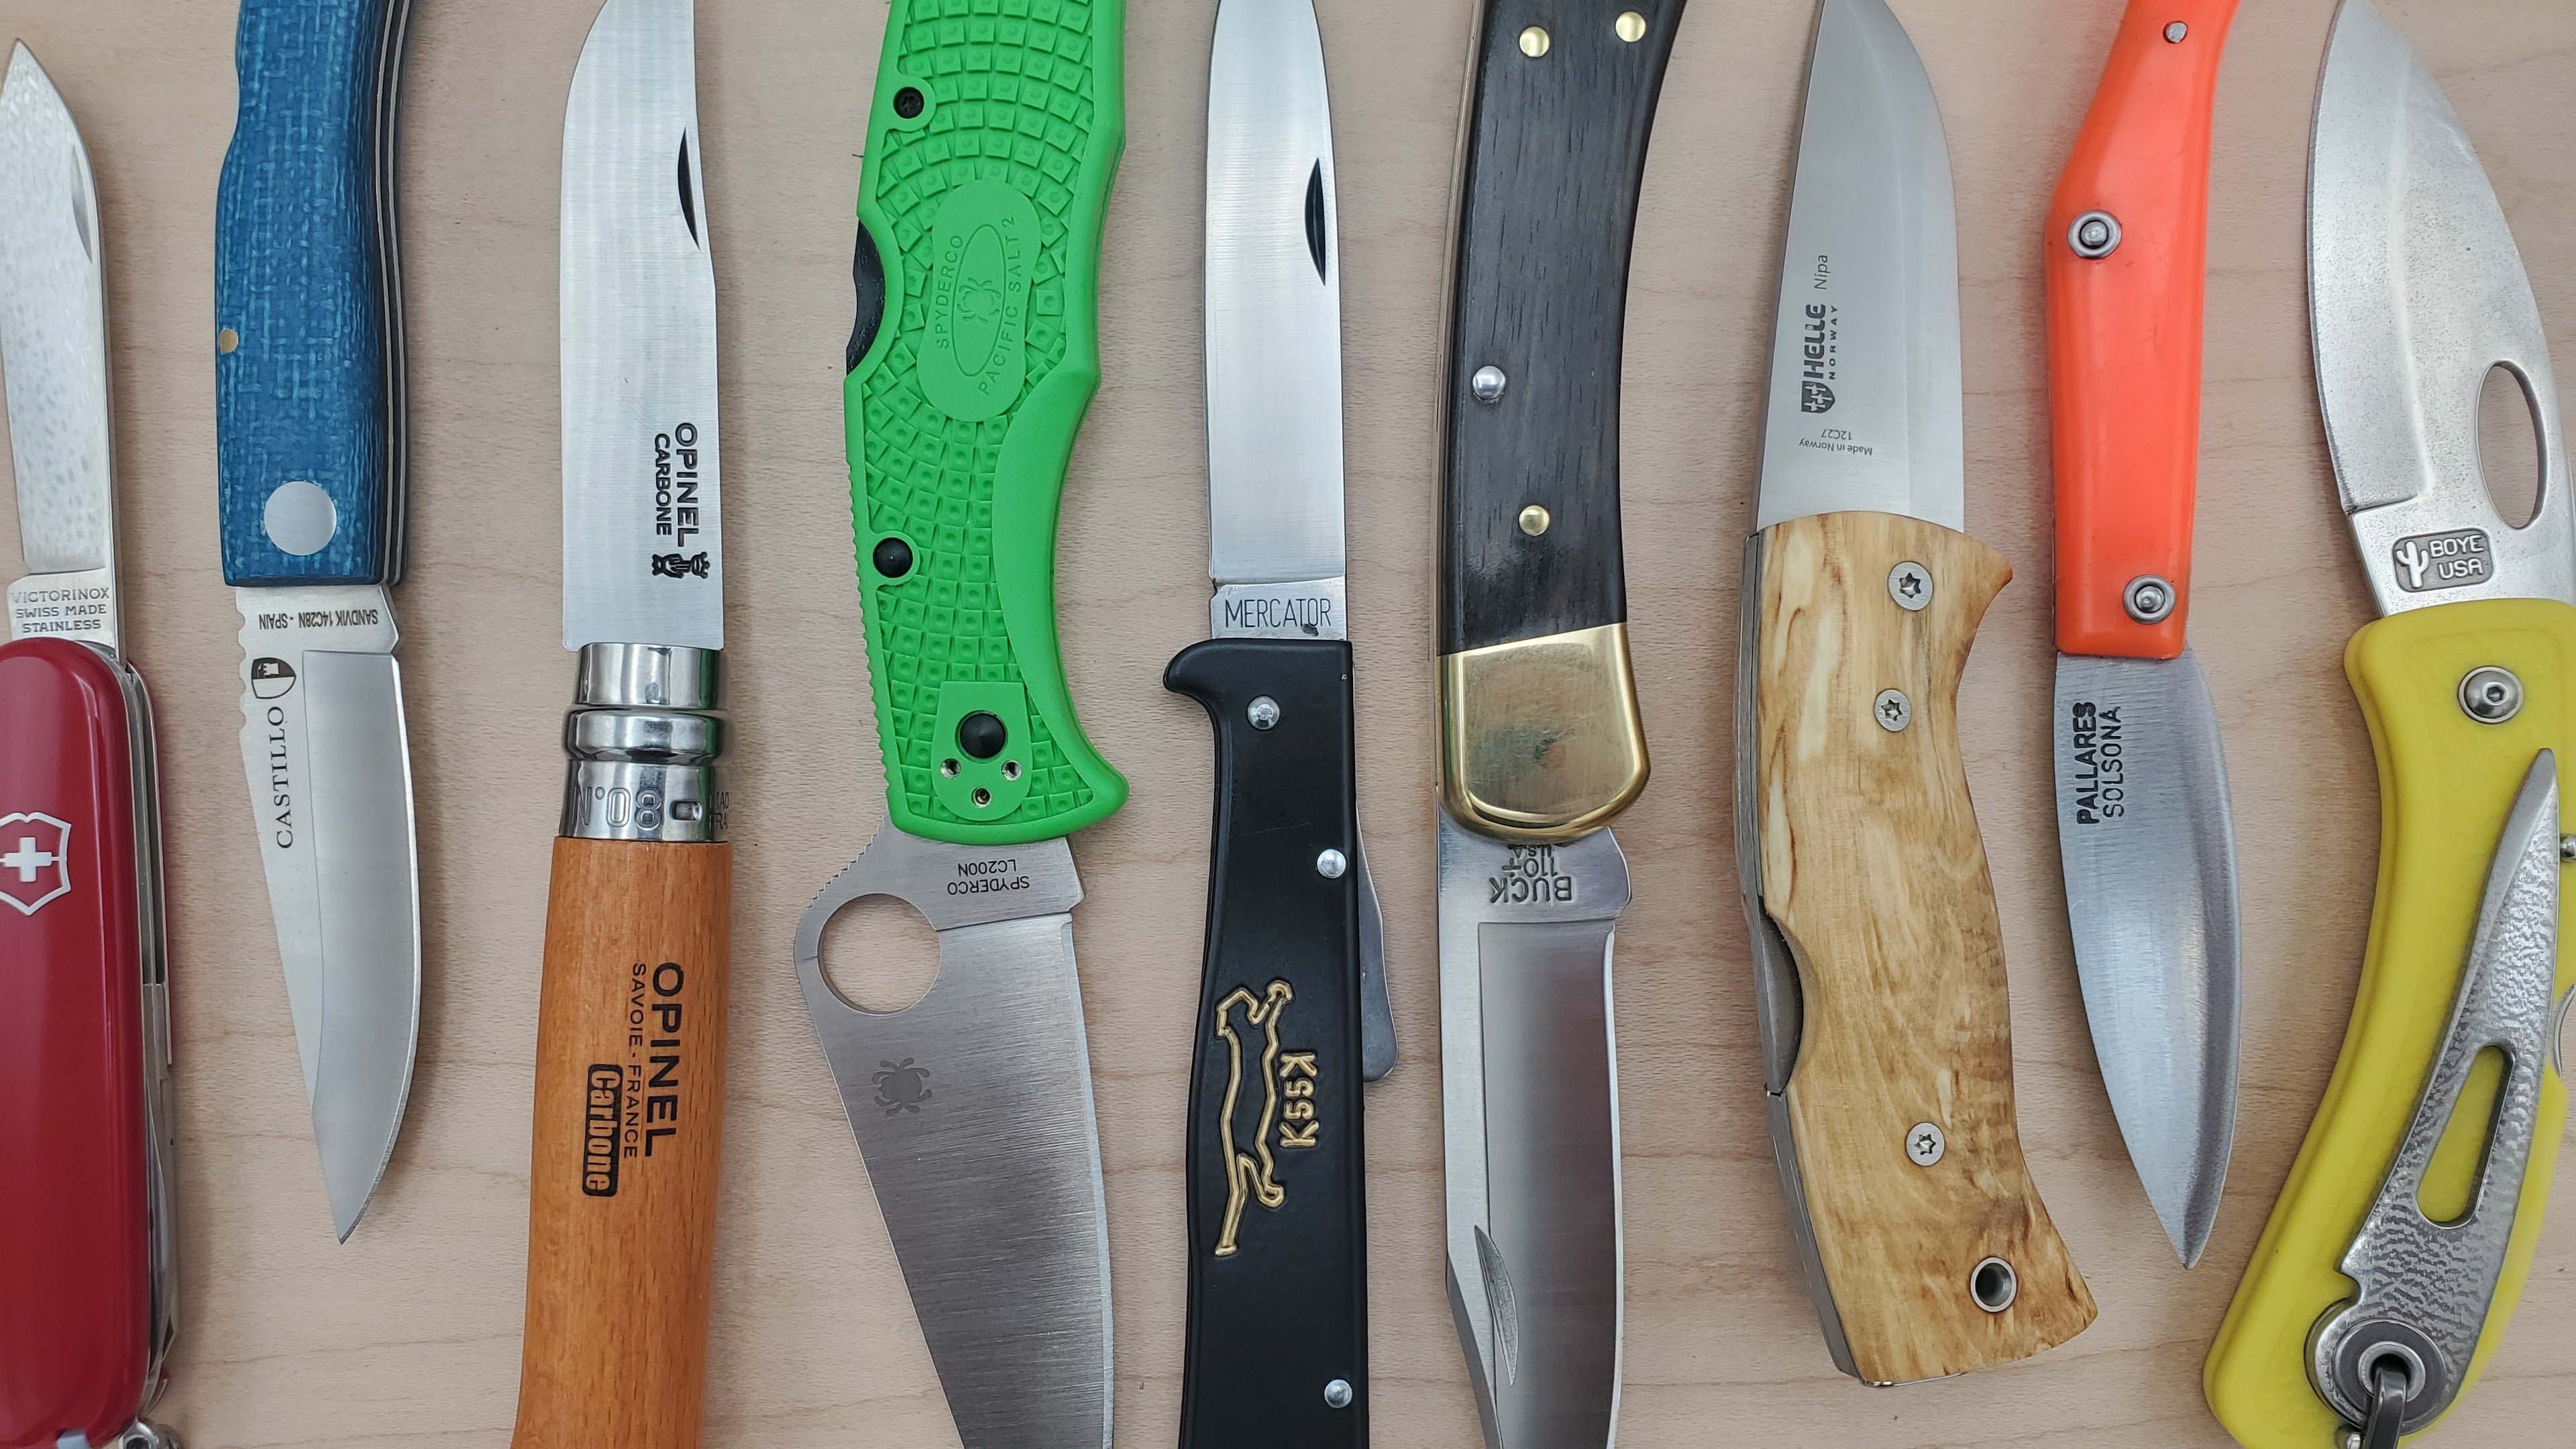 Knives on Sale Clearance - Discount Knives for Sale Online